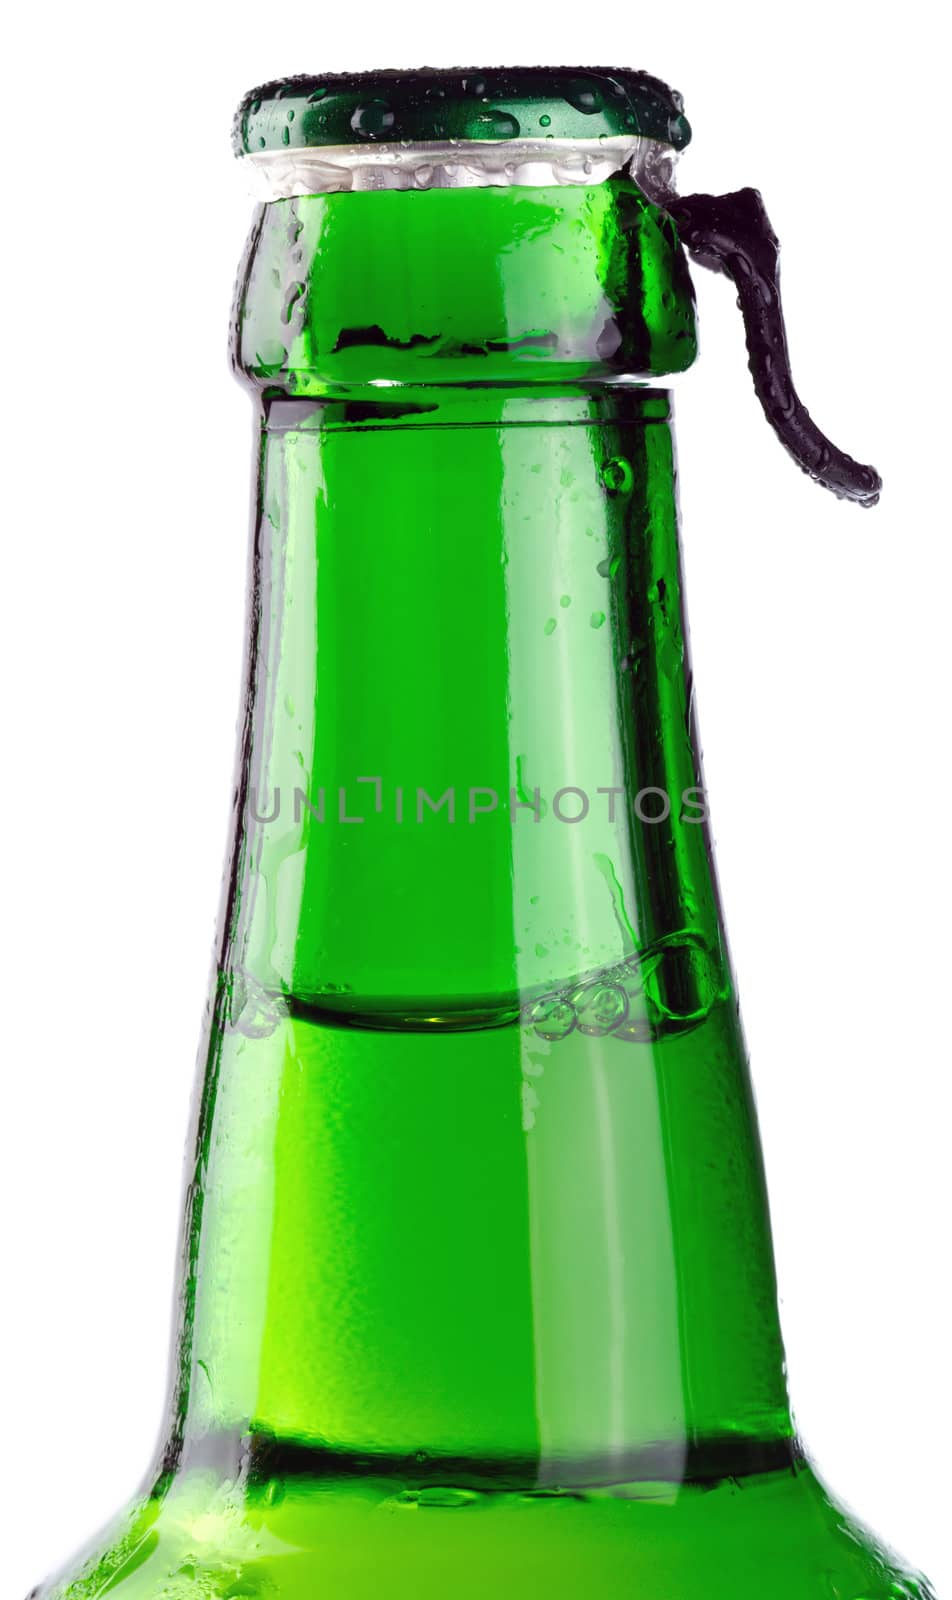 Green beer bottle on the white background